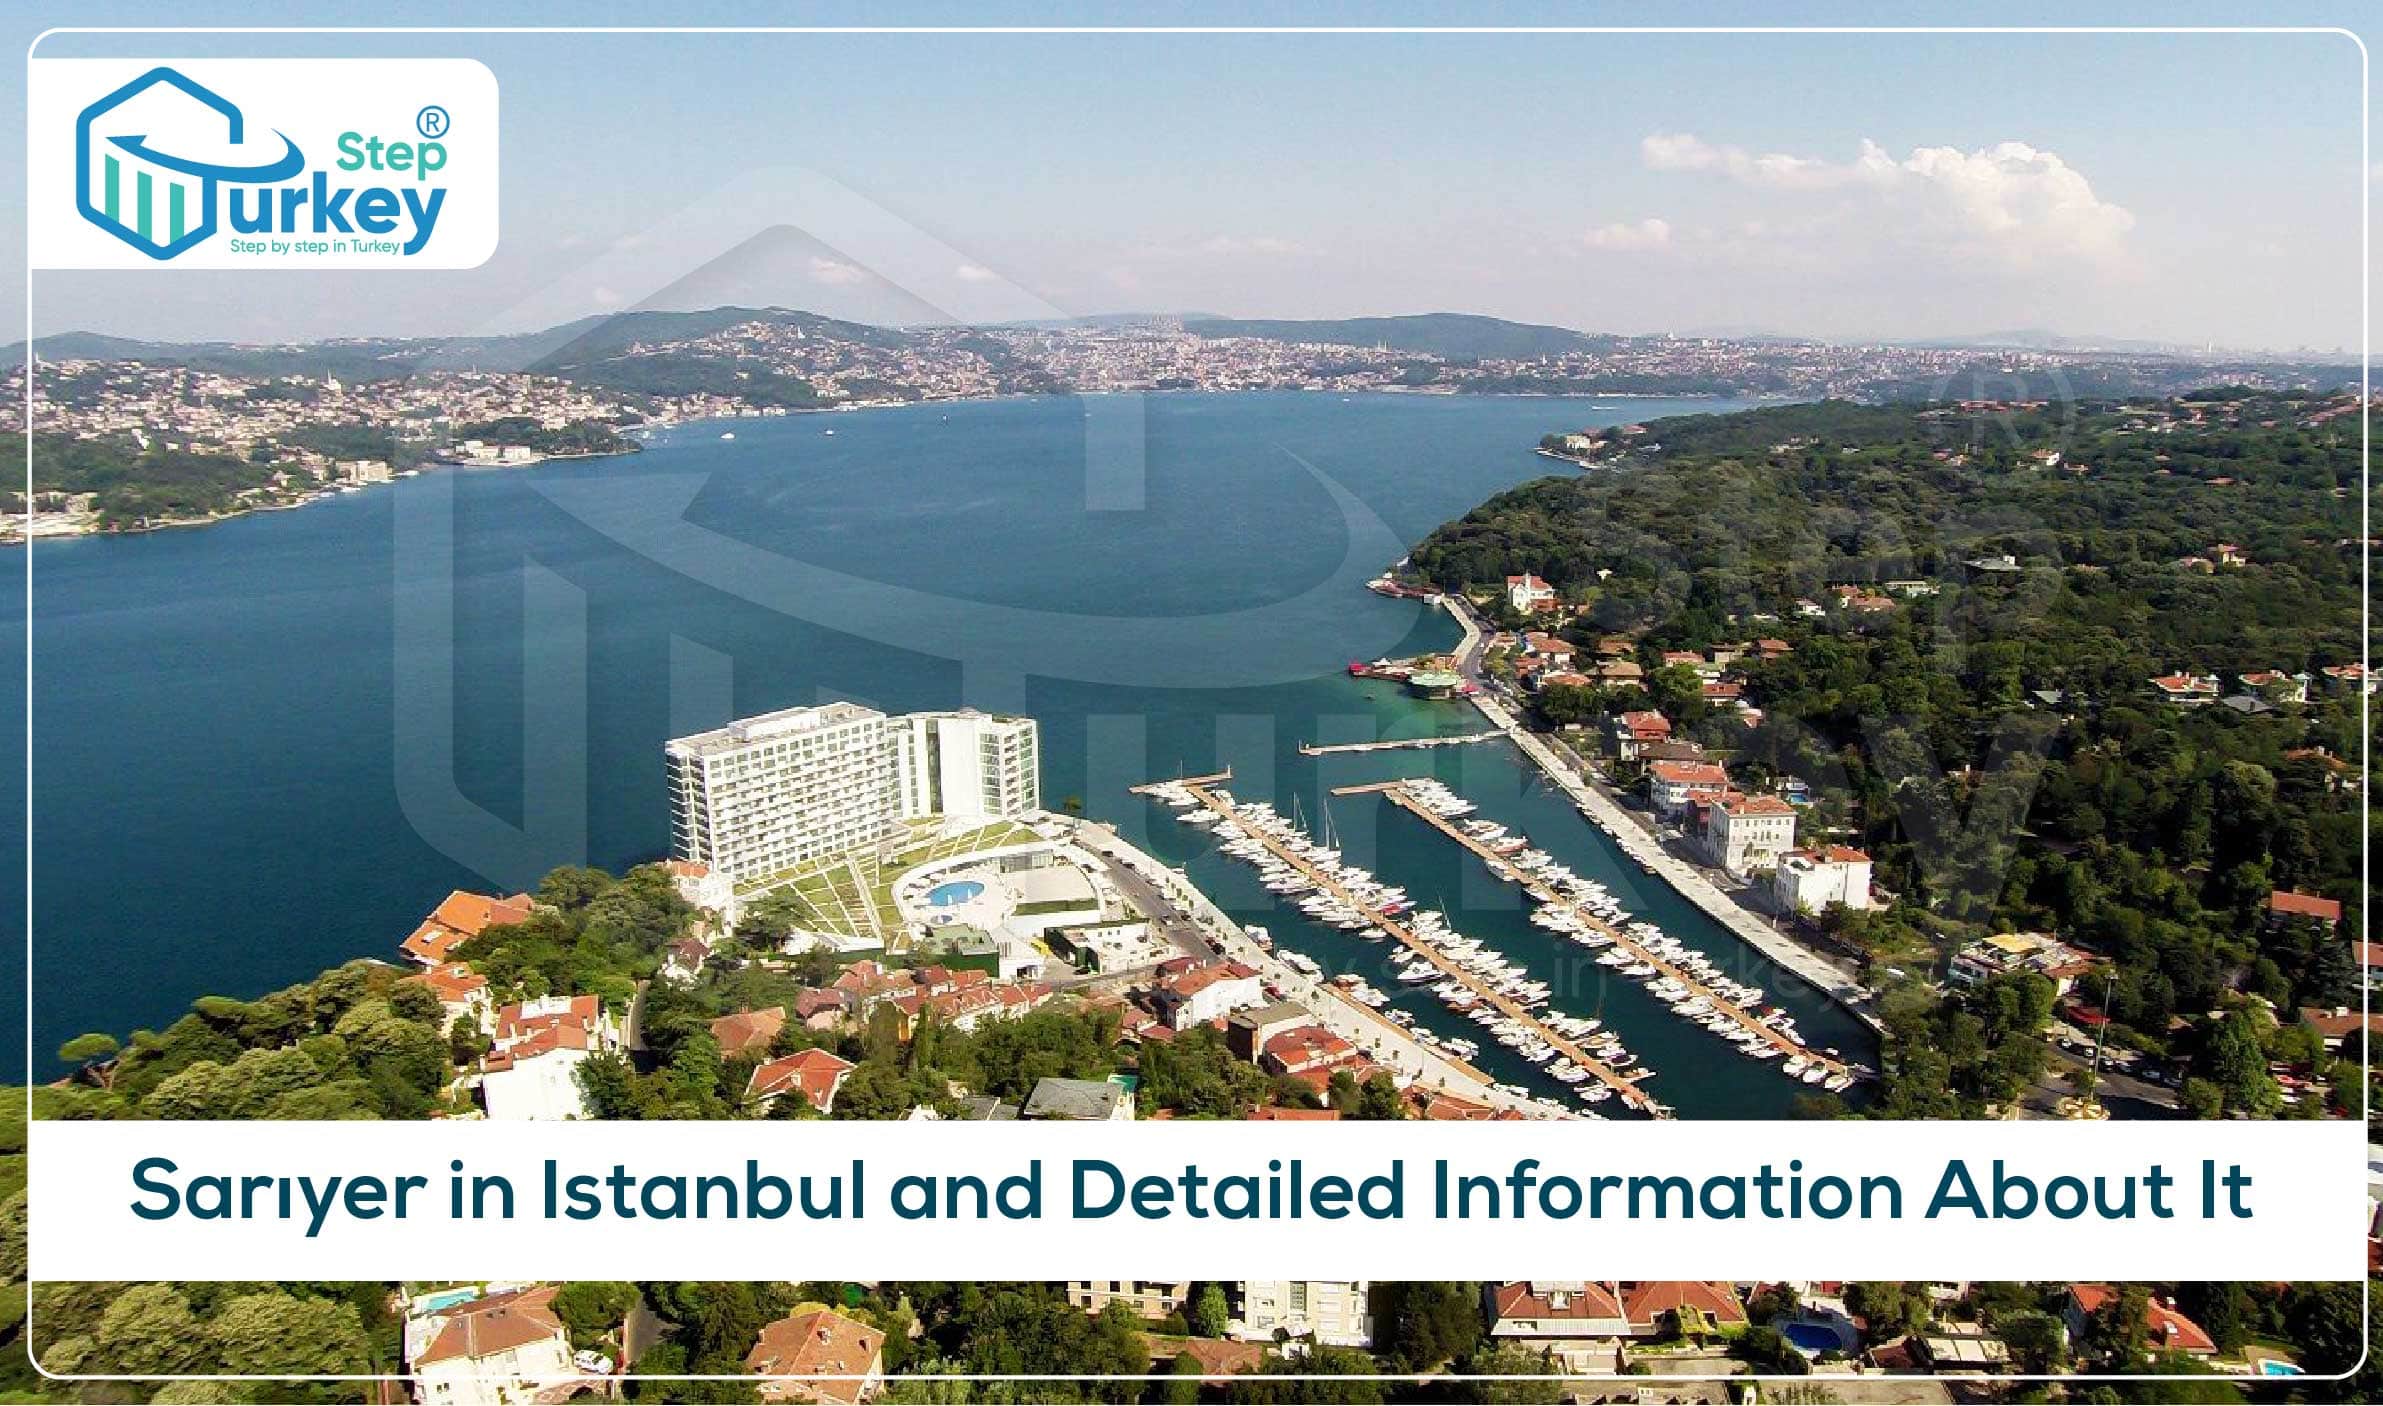 Sarıyer in Istanbul and Detailed Information About It